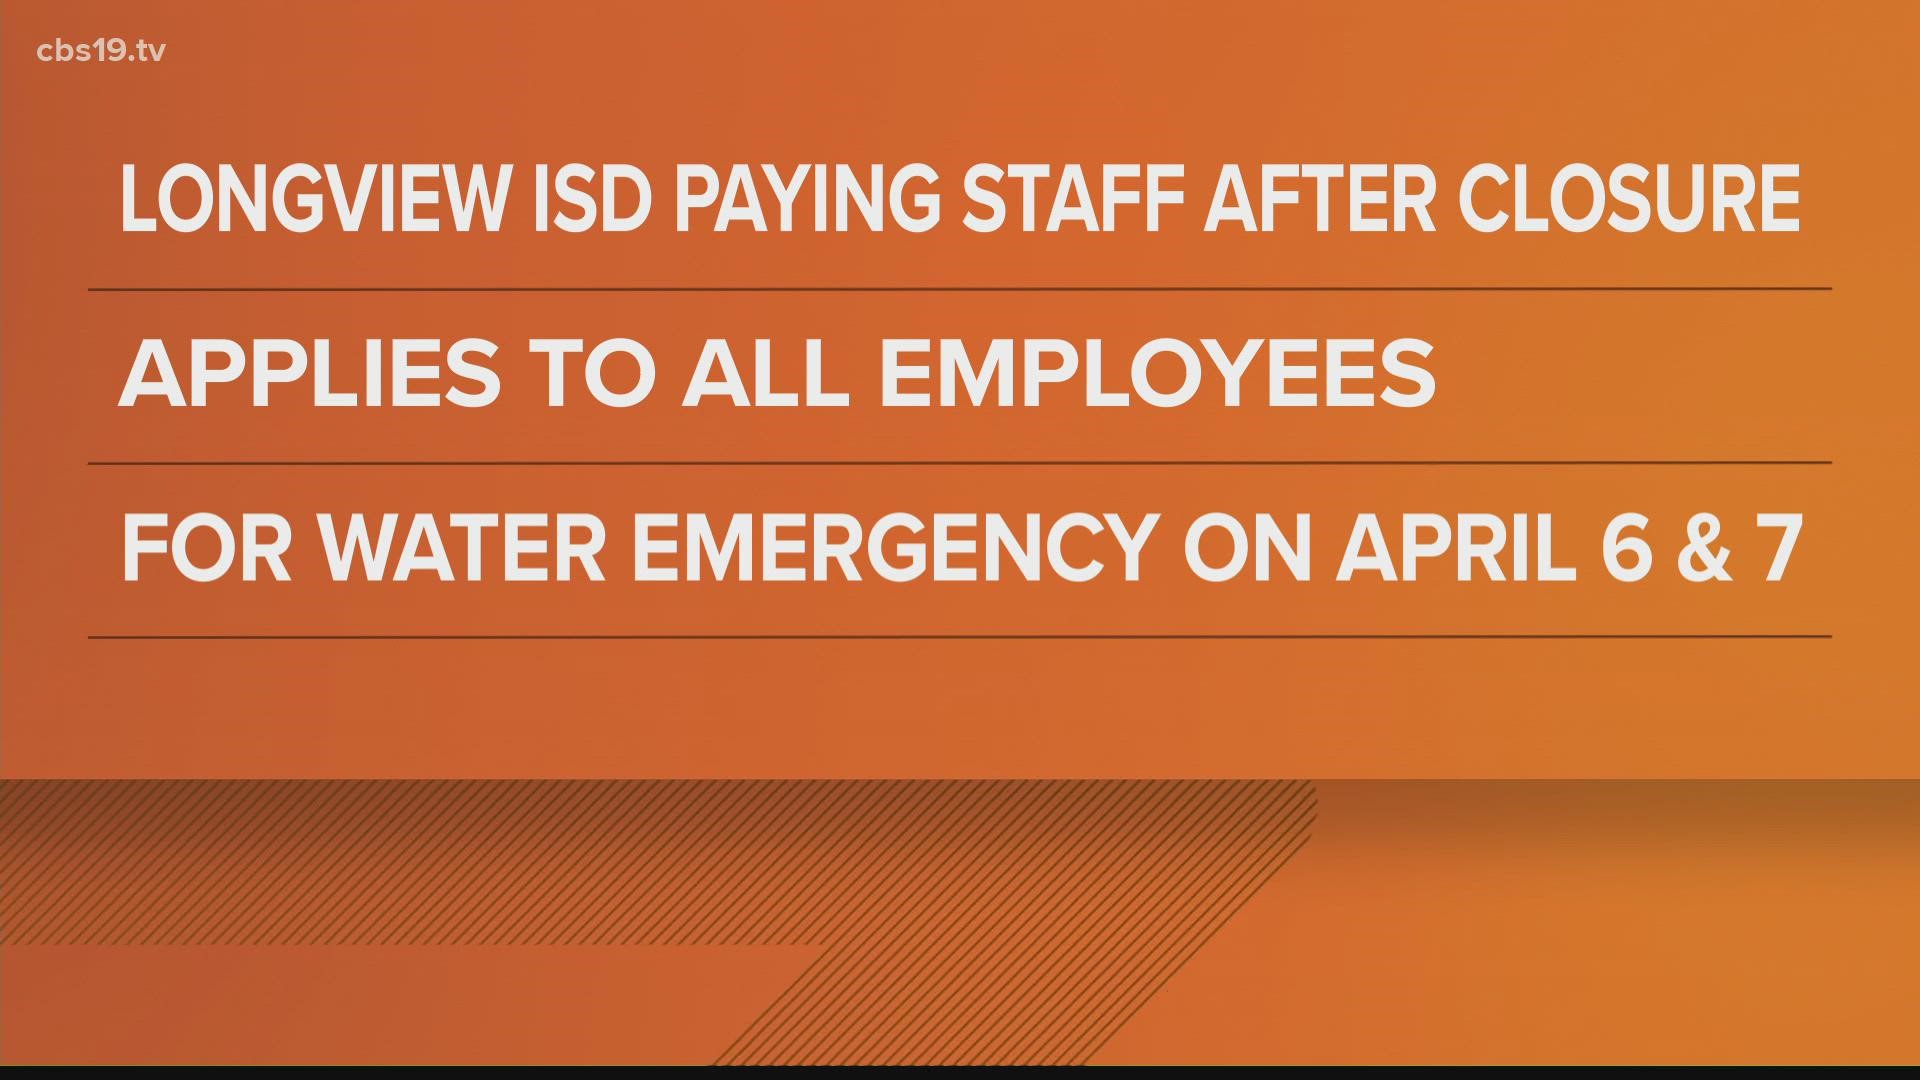 Longview ISD OKs plan to pay staff amid water outage closings